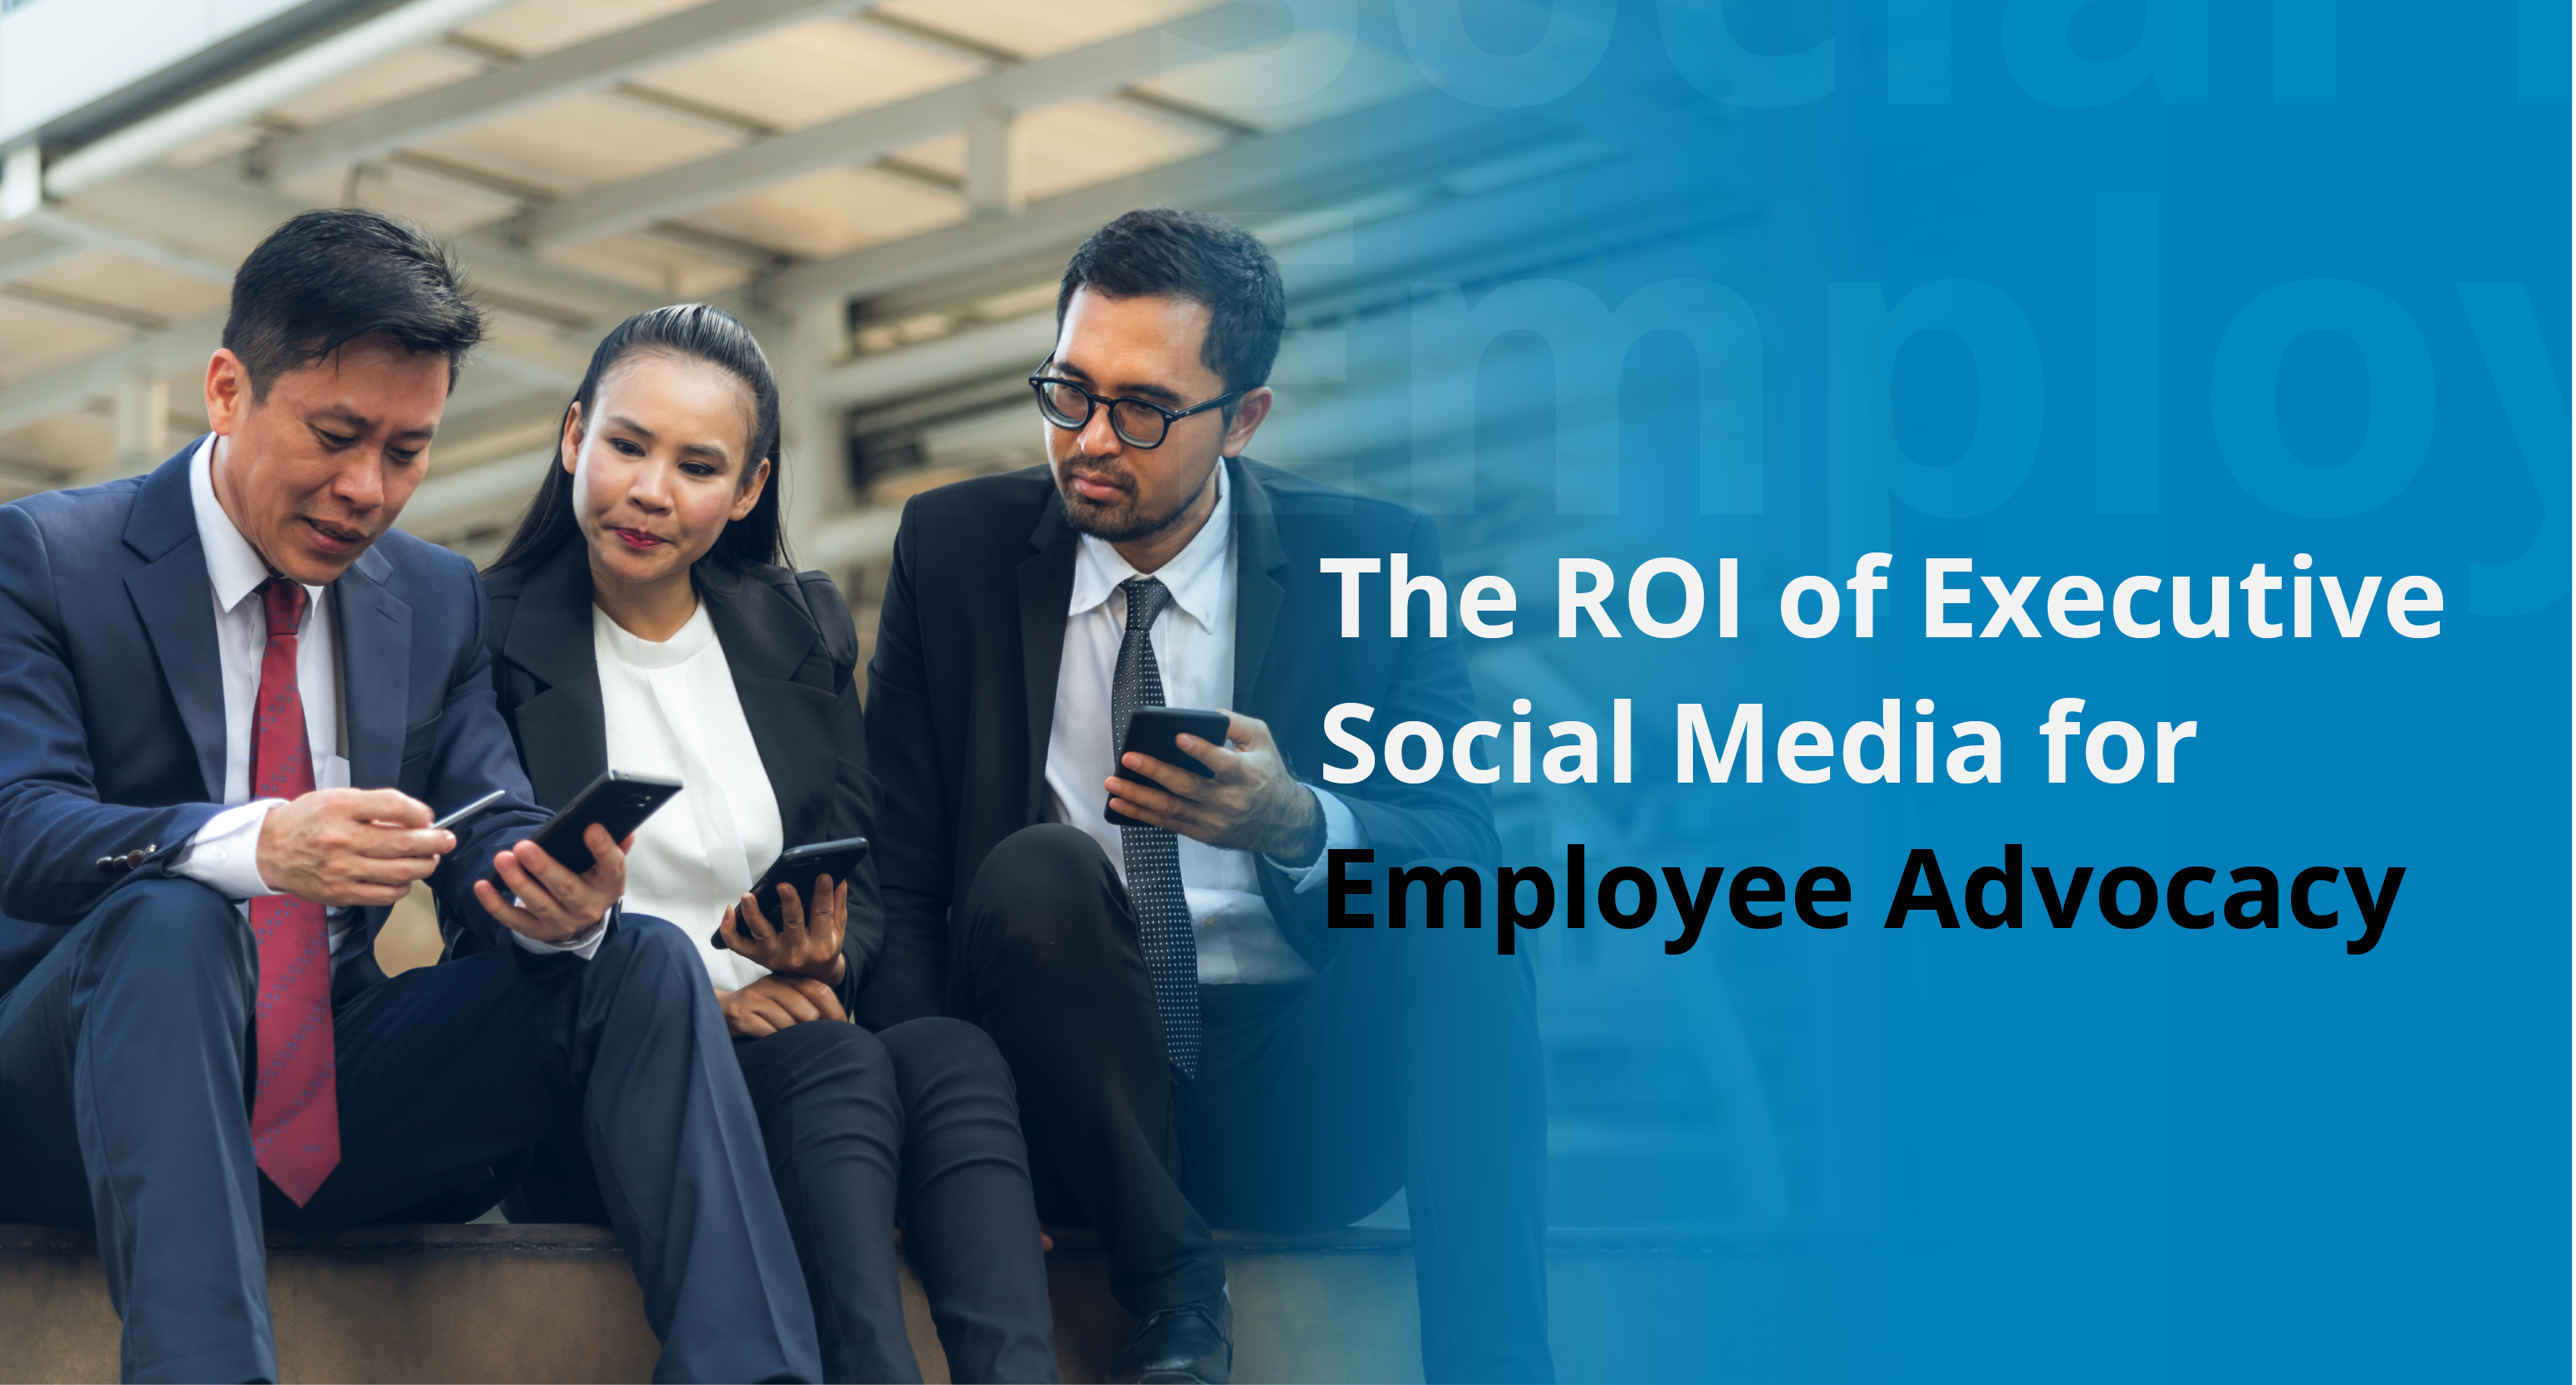 Social Media for Employee Advocacy